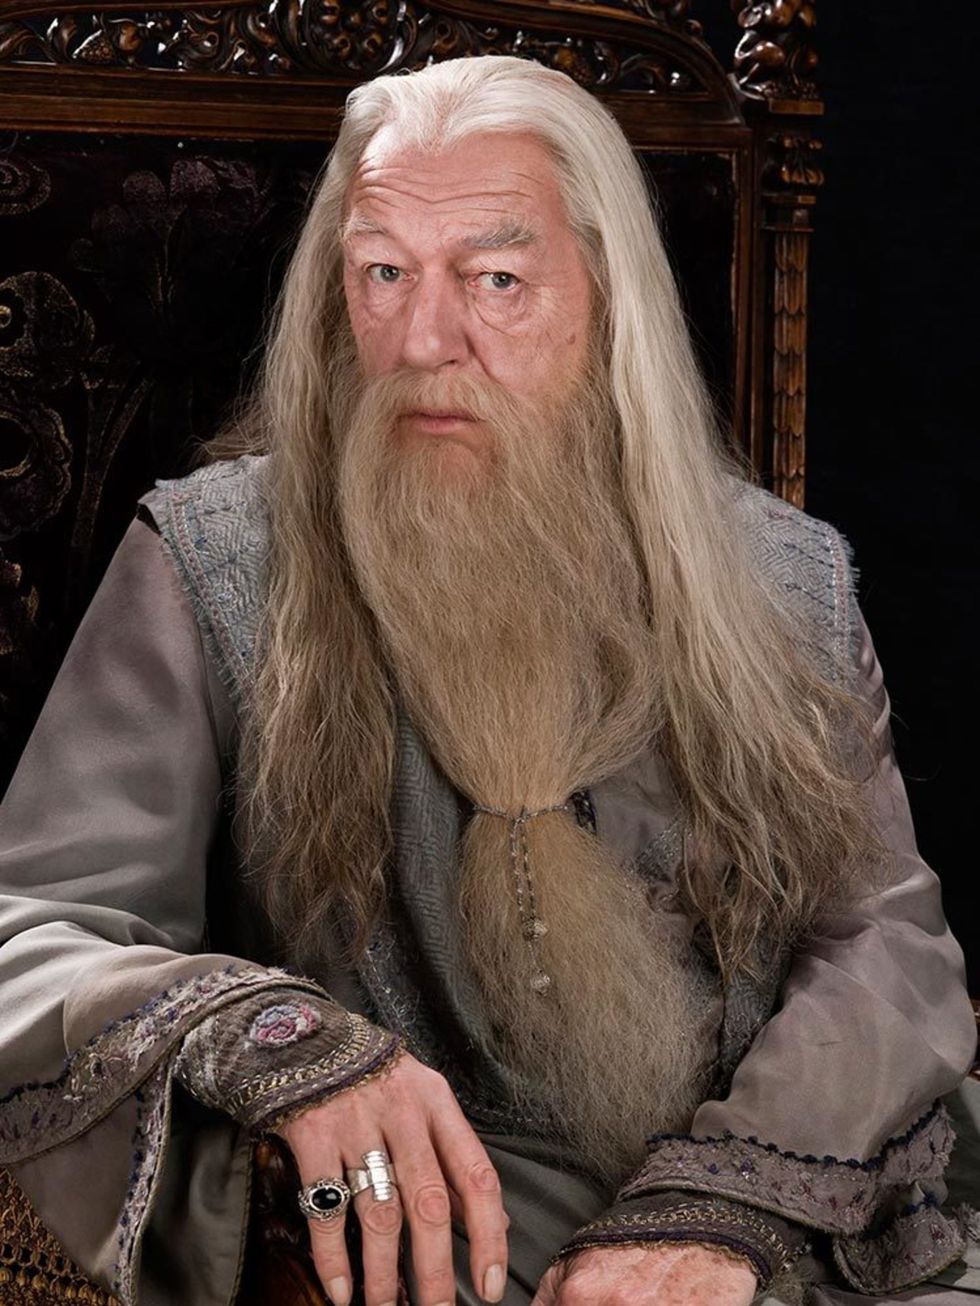 Albus Dumbledore played by Michael Gambon